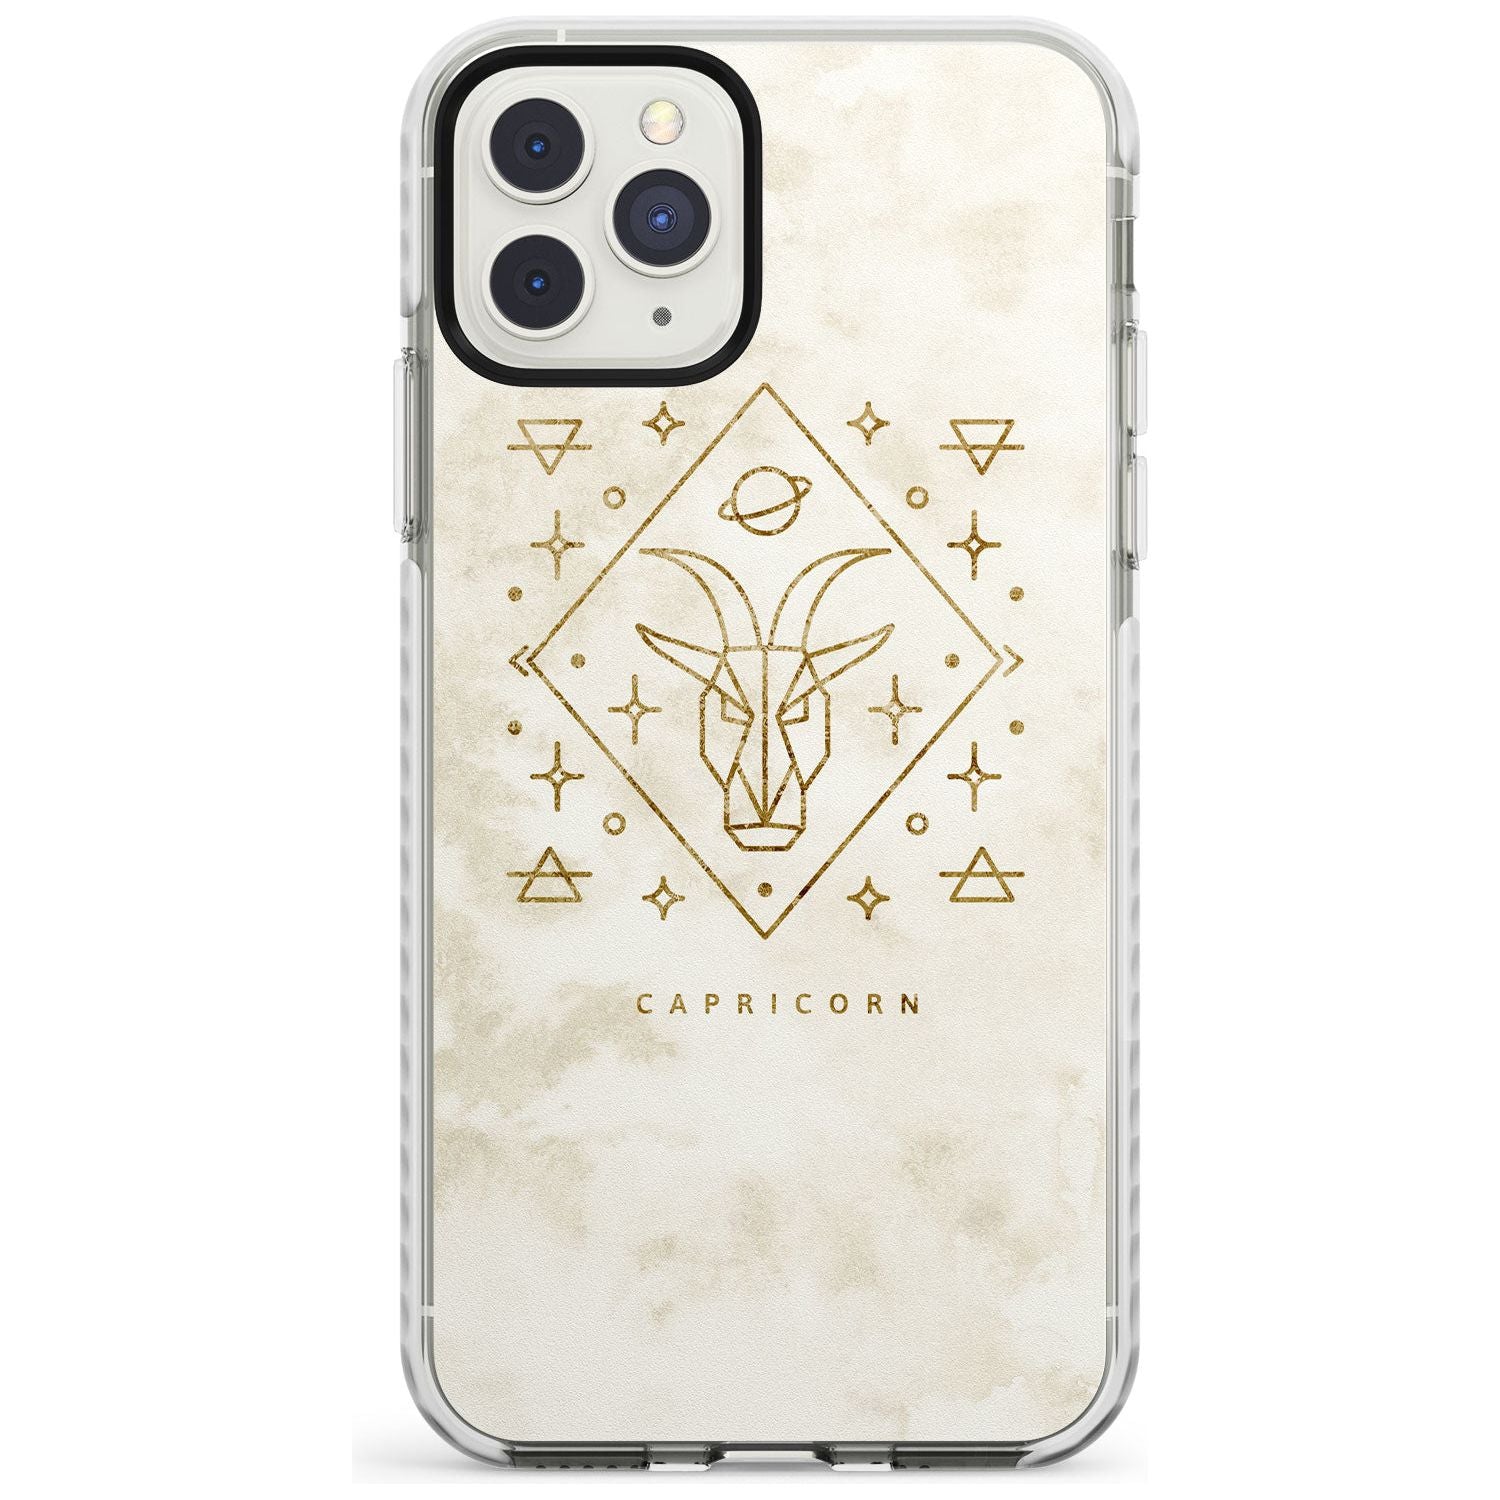 Capricorn Emblem - Solid Gold Marbled Design Impact Phone Case for iPhone 11 Pro Max